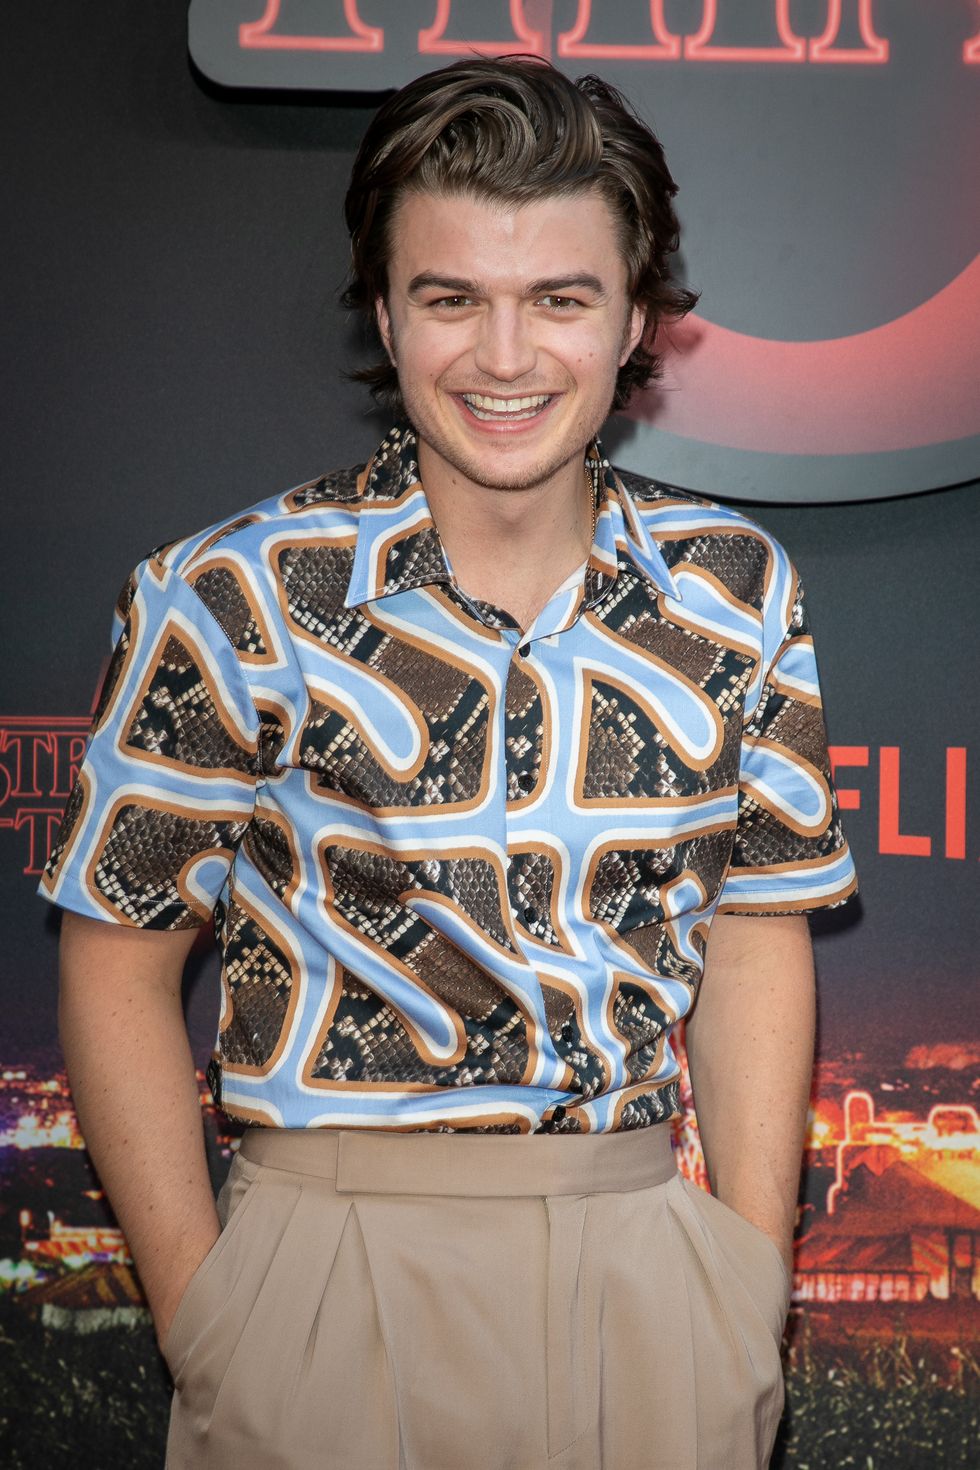 Premiere Of Netflix's "Stranger Things" : Photocall At Le Grand Rex In Paris